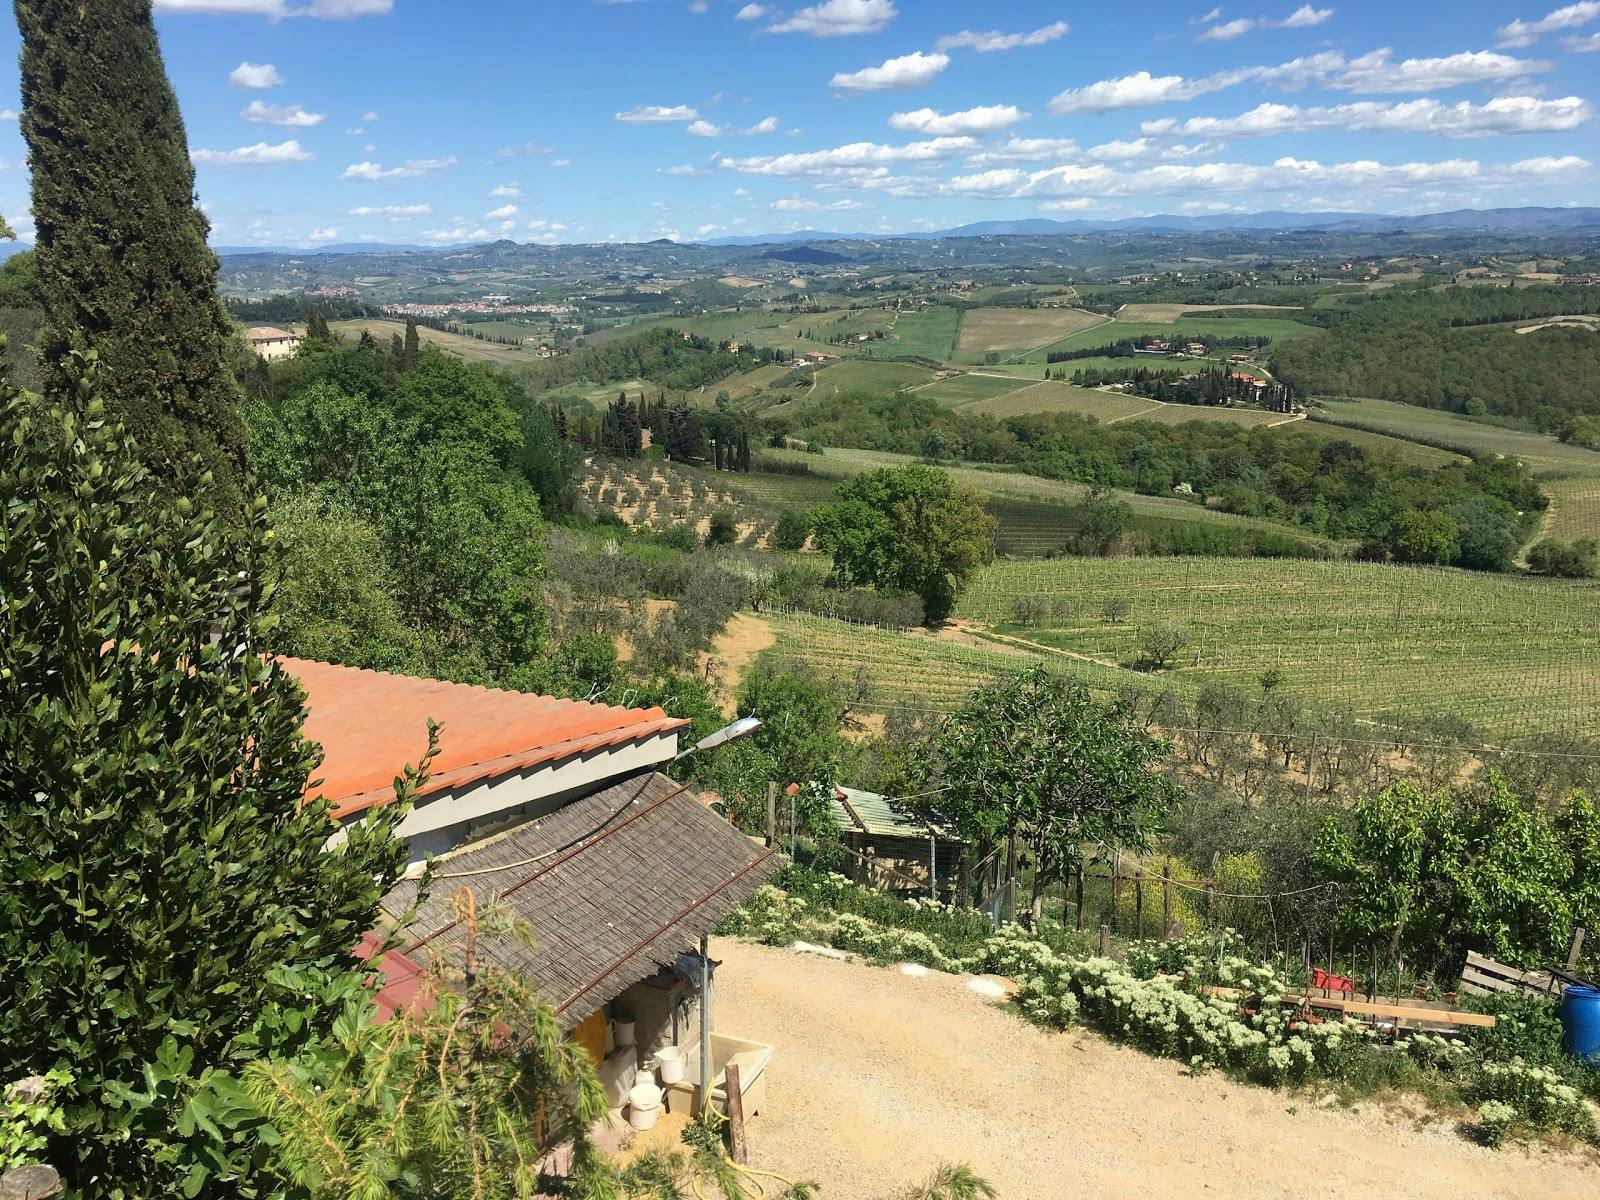 Image - My Tuscan Wine and Tours